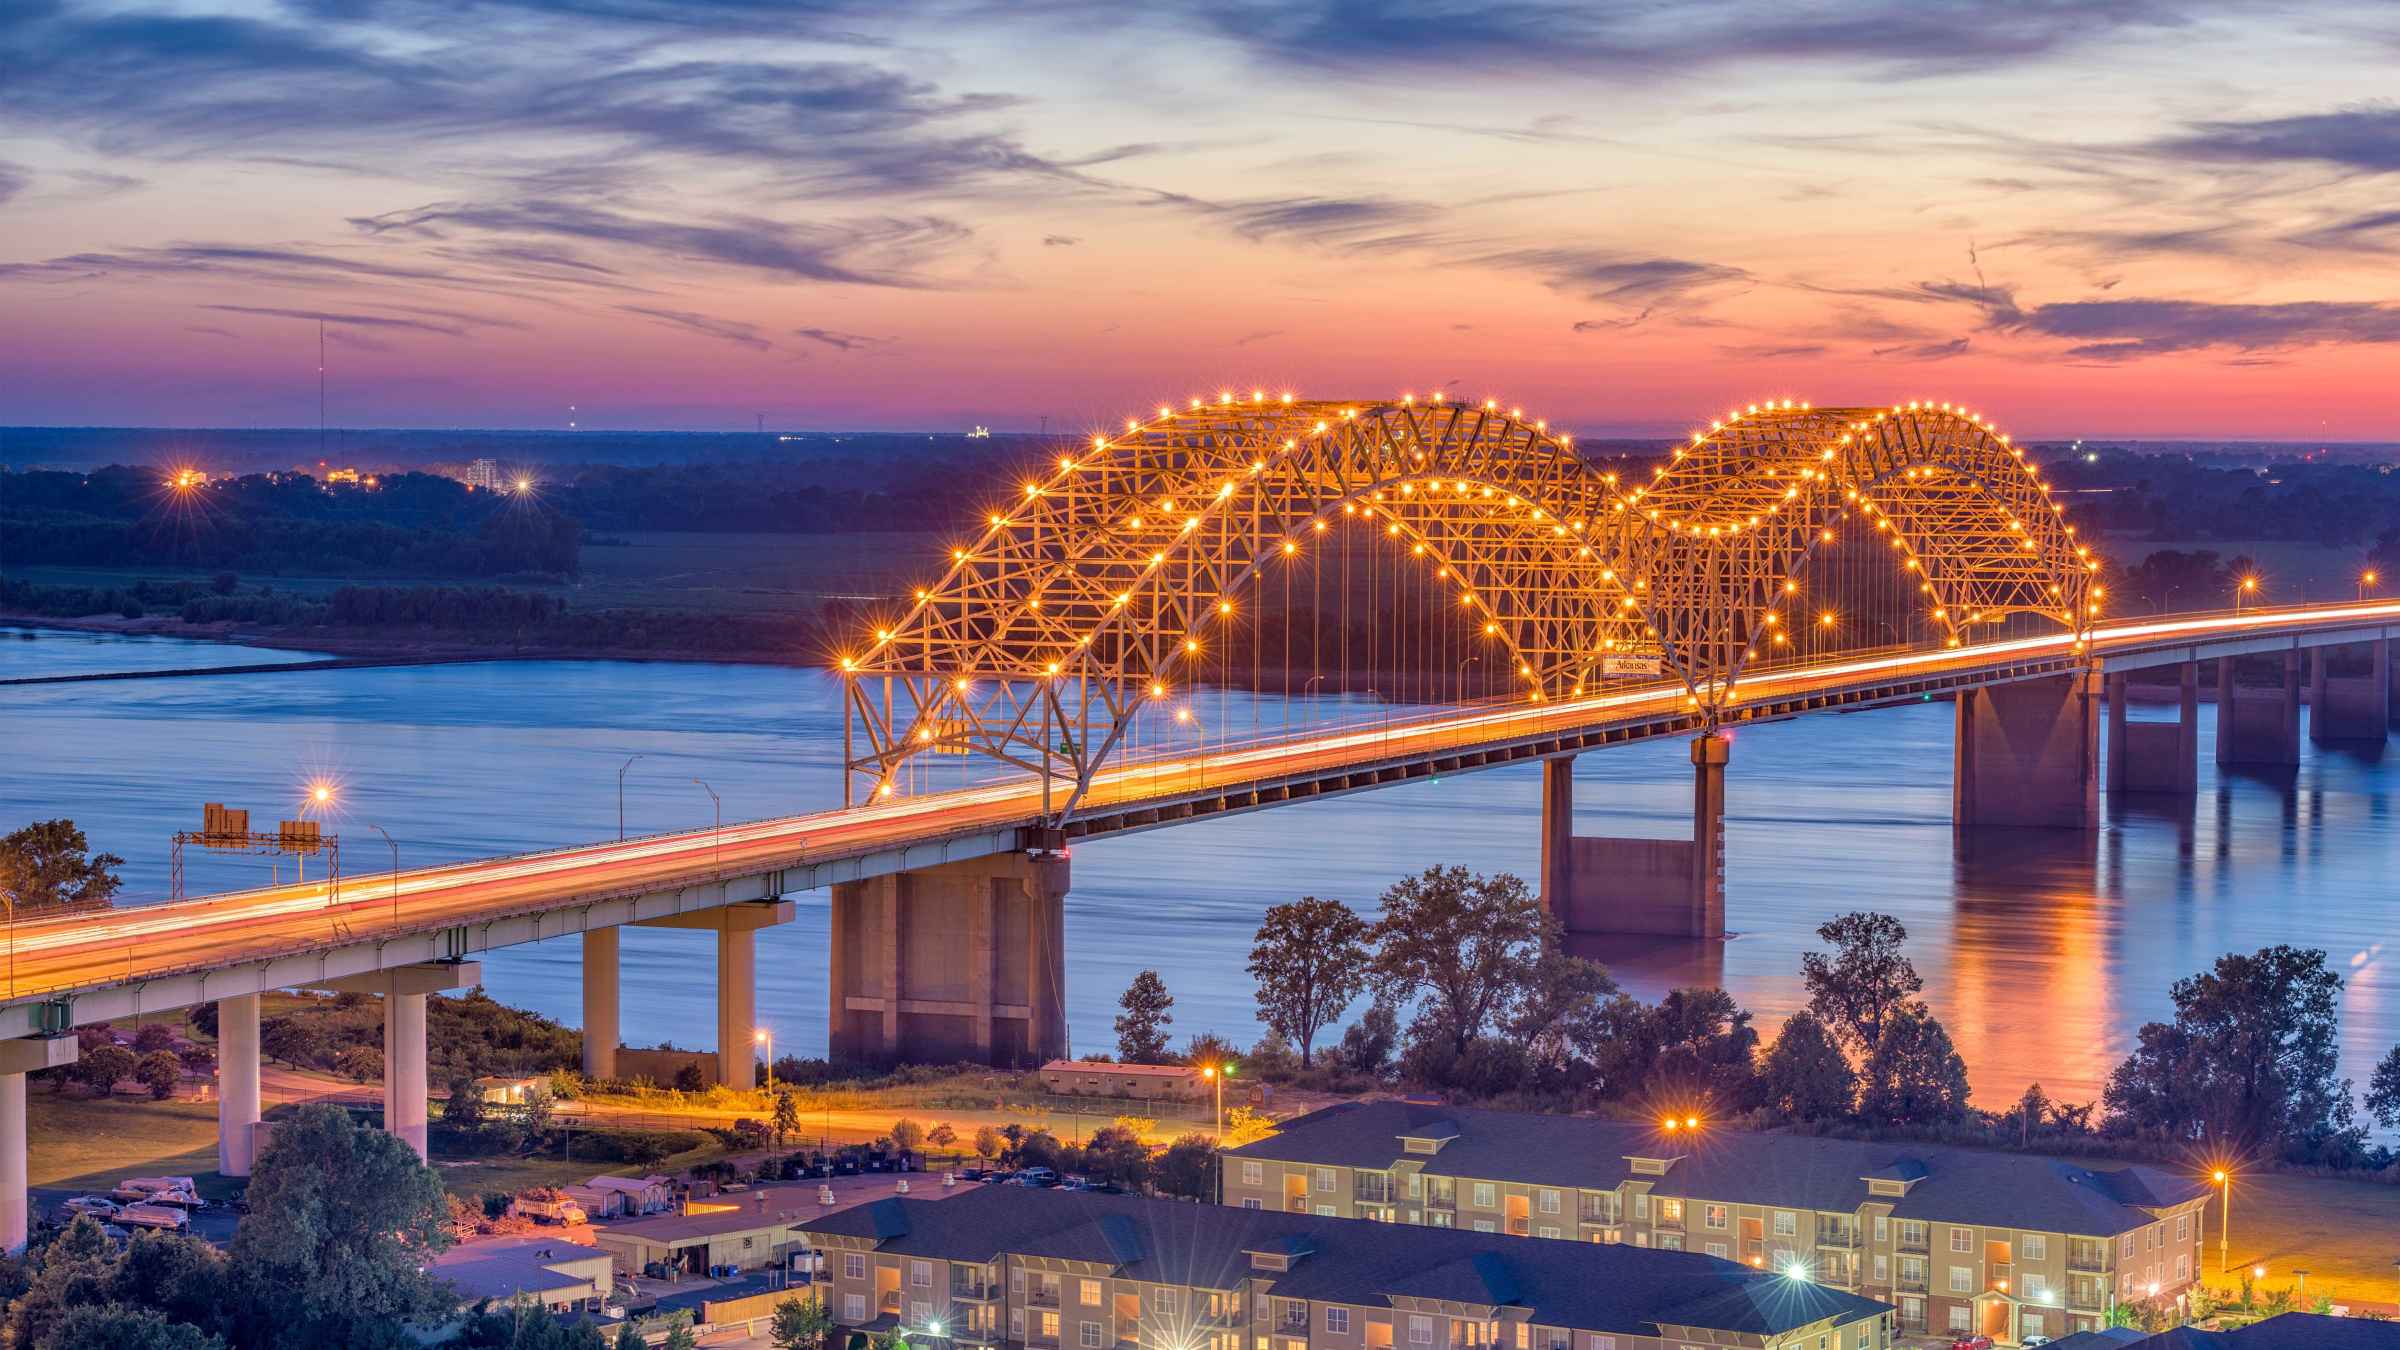 The BEST Memphis, Tennessee Tours and Things to Do in 2022 FREE